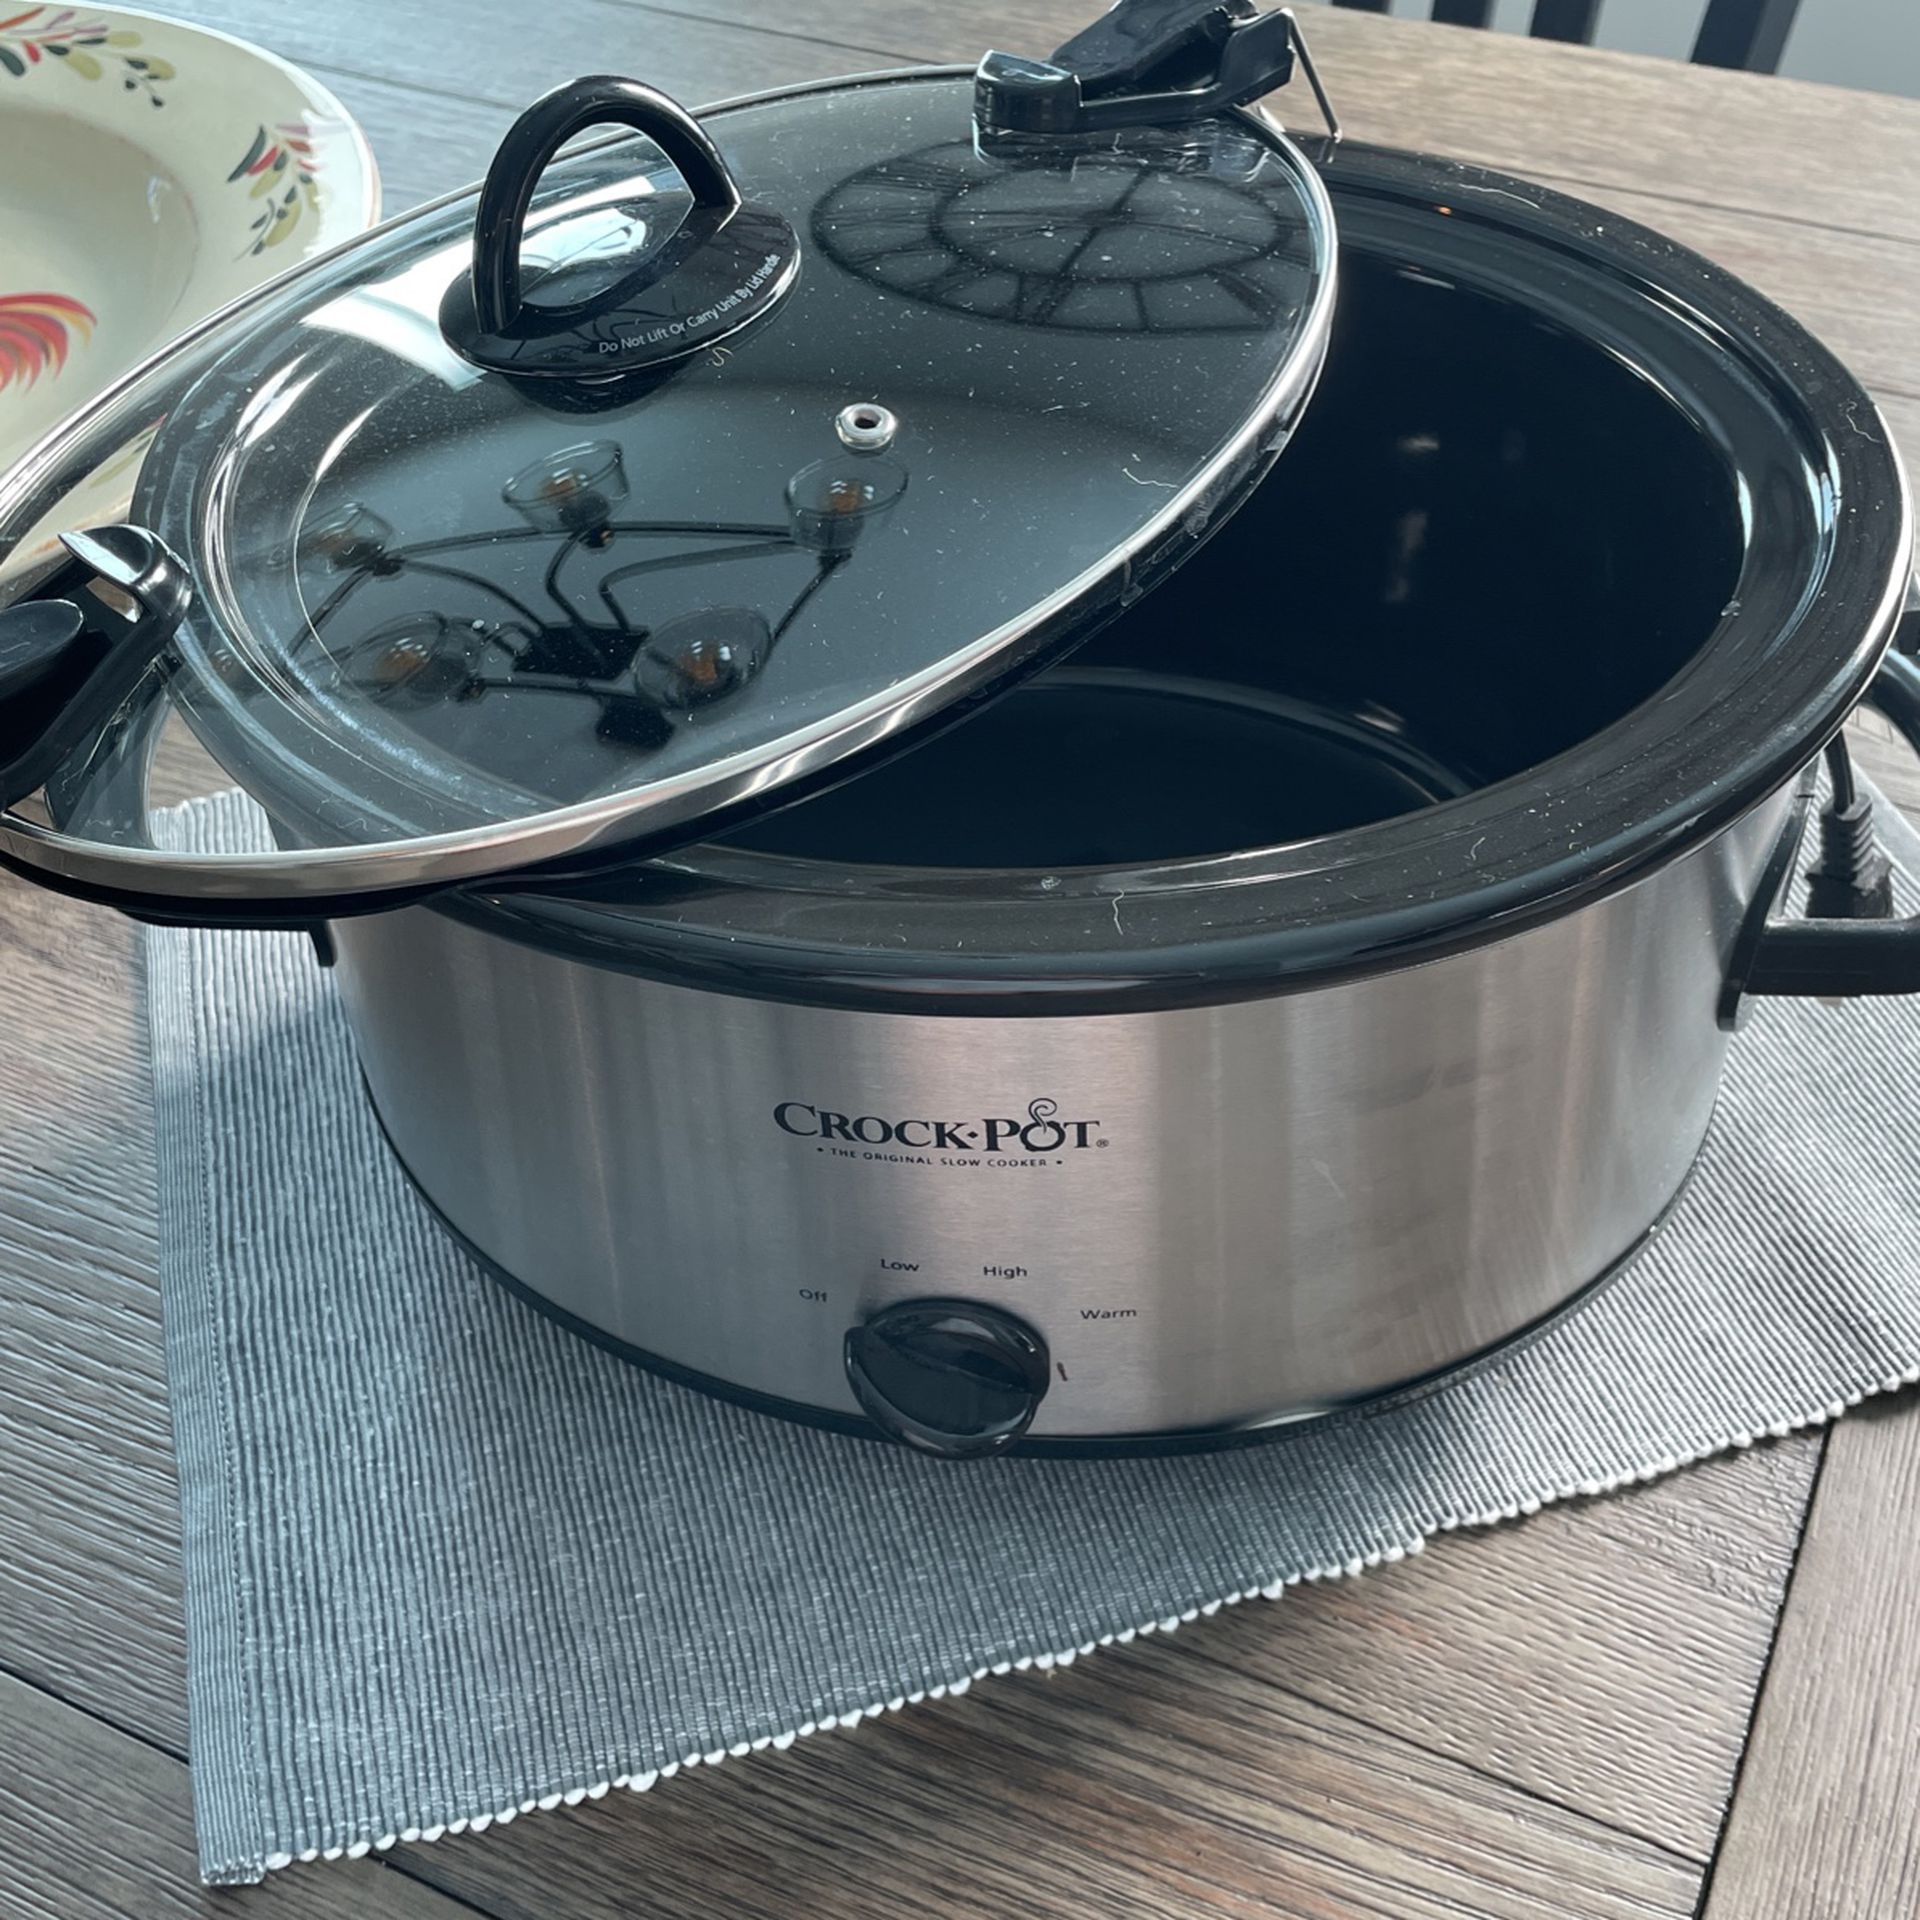 Personal Slow Cooker Crock Pot for Sale in Palm Beach Shores, FL - OfferUp